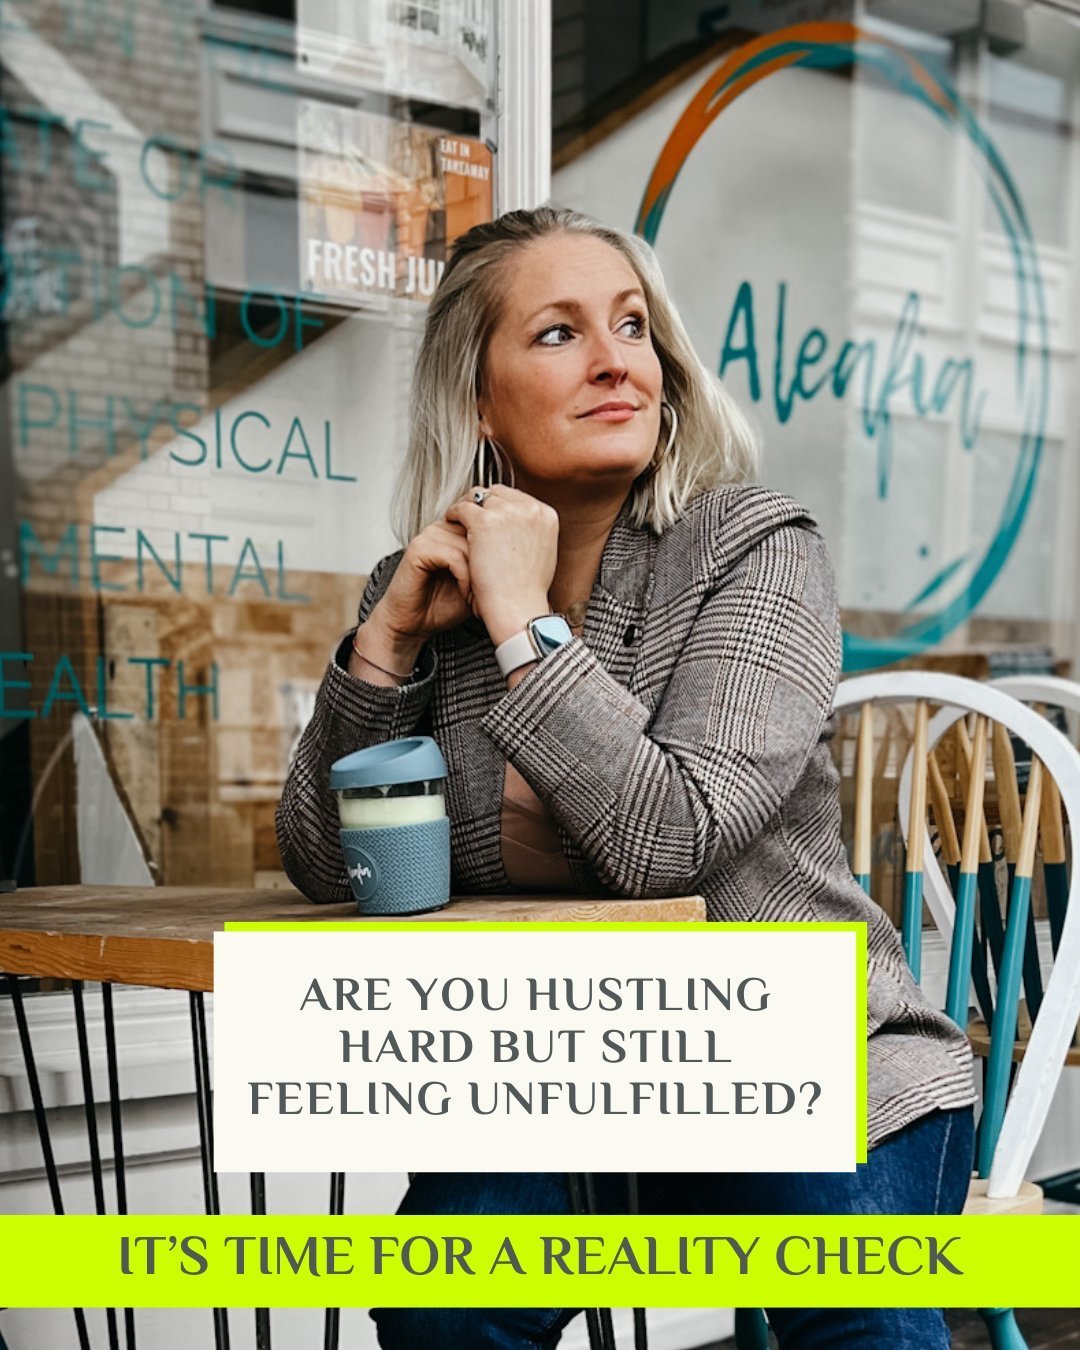 Are you hustling hard but still feeling unfulfilled? You're not alone.⁠
⁠
As a successful woman in business, you&rsquo;re hitting those ambitious targets, but at what cost? Stress, burnout, middle tyre, low libido and a lingering sense of emptiness?⁠